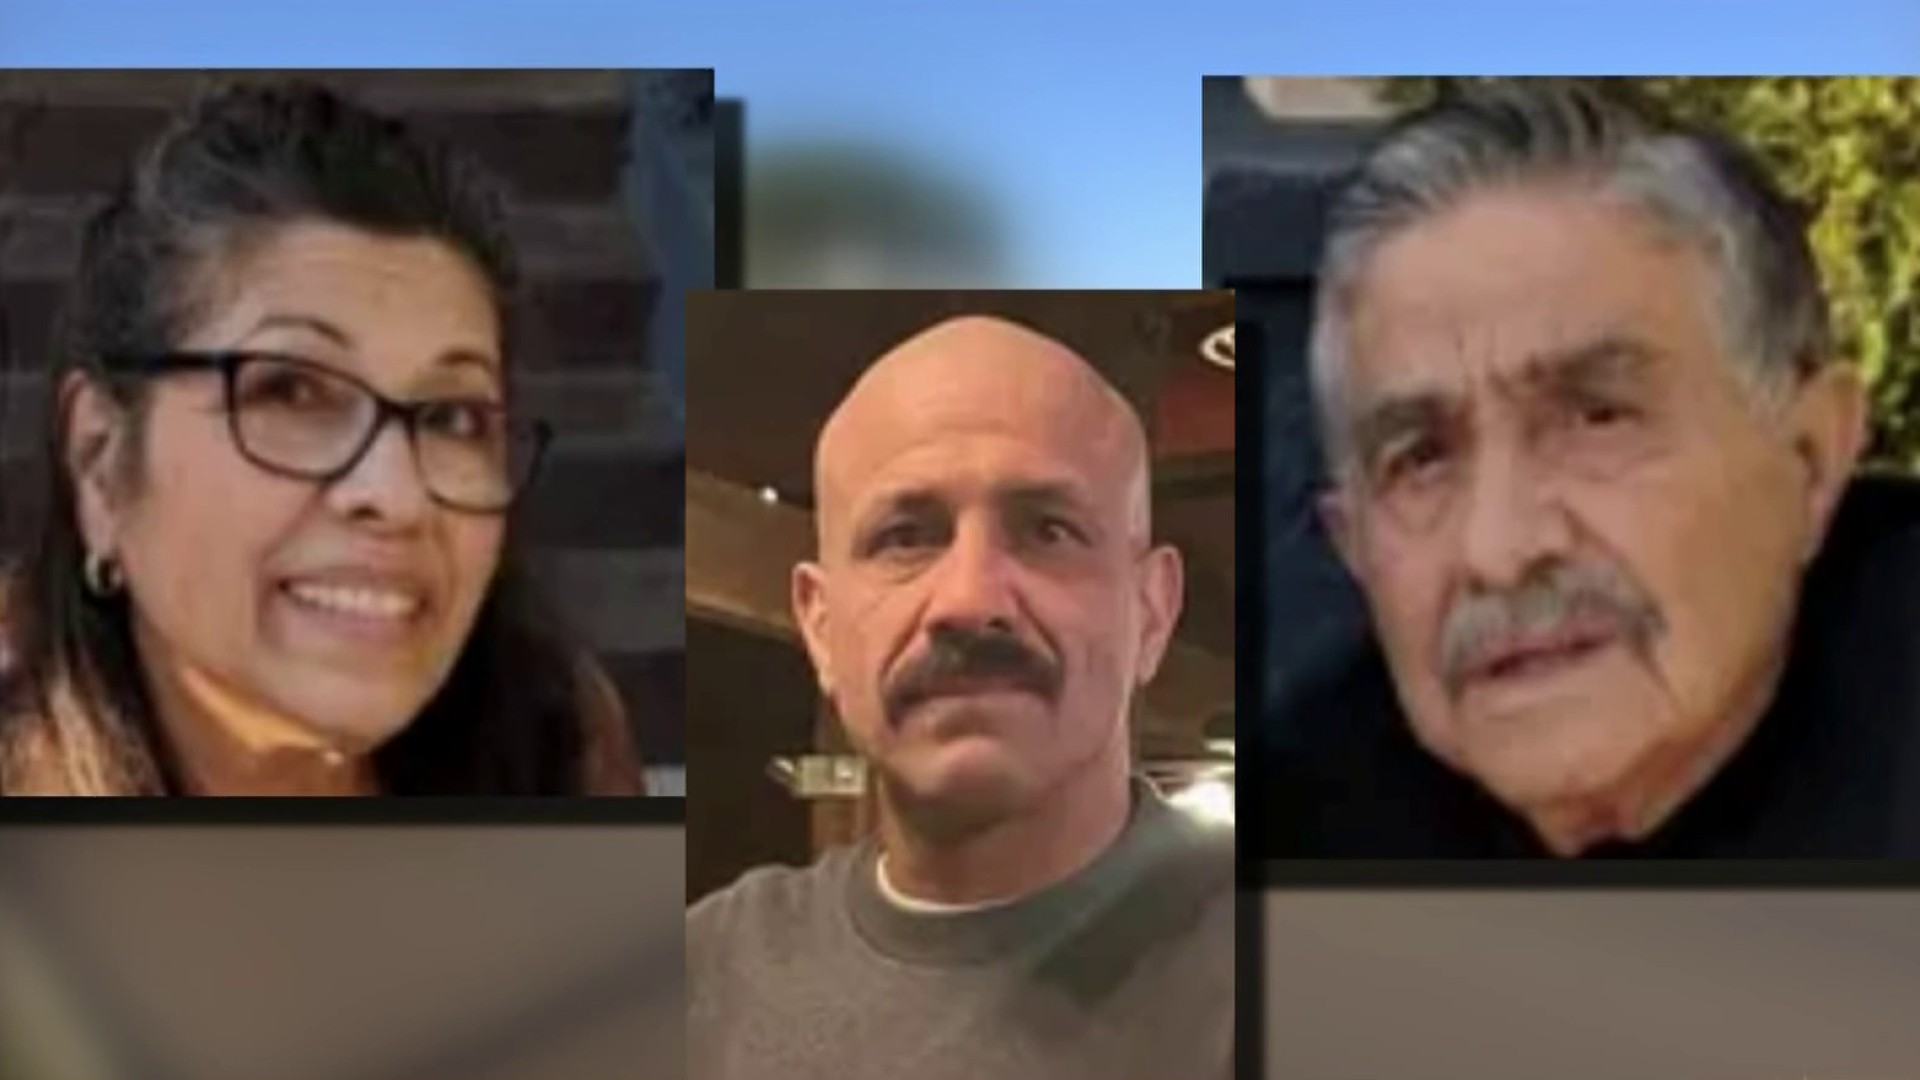 Relatives Share New Details About Triple Murder in Montclair